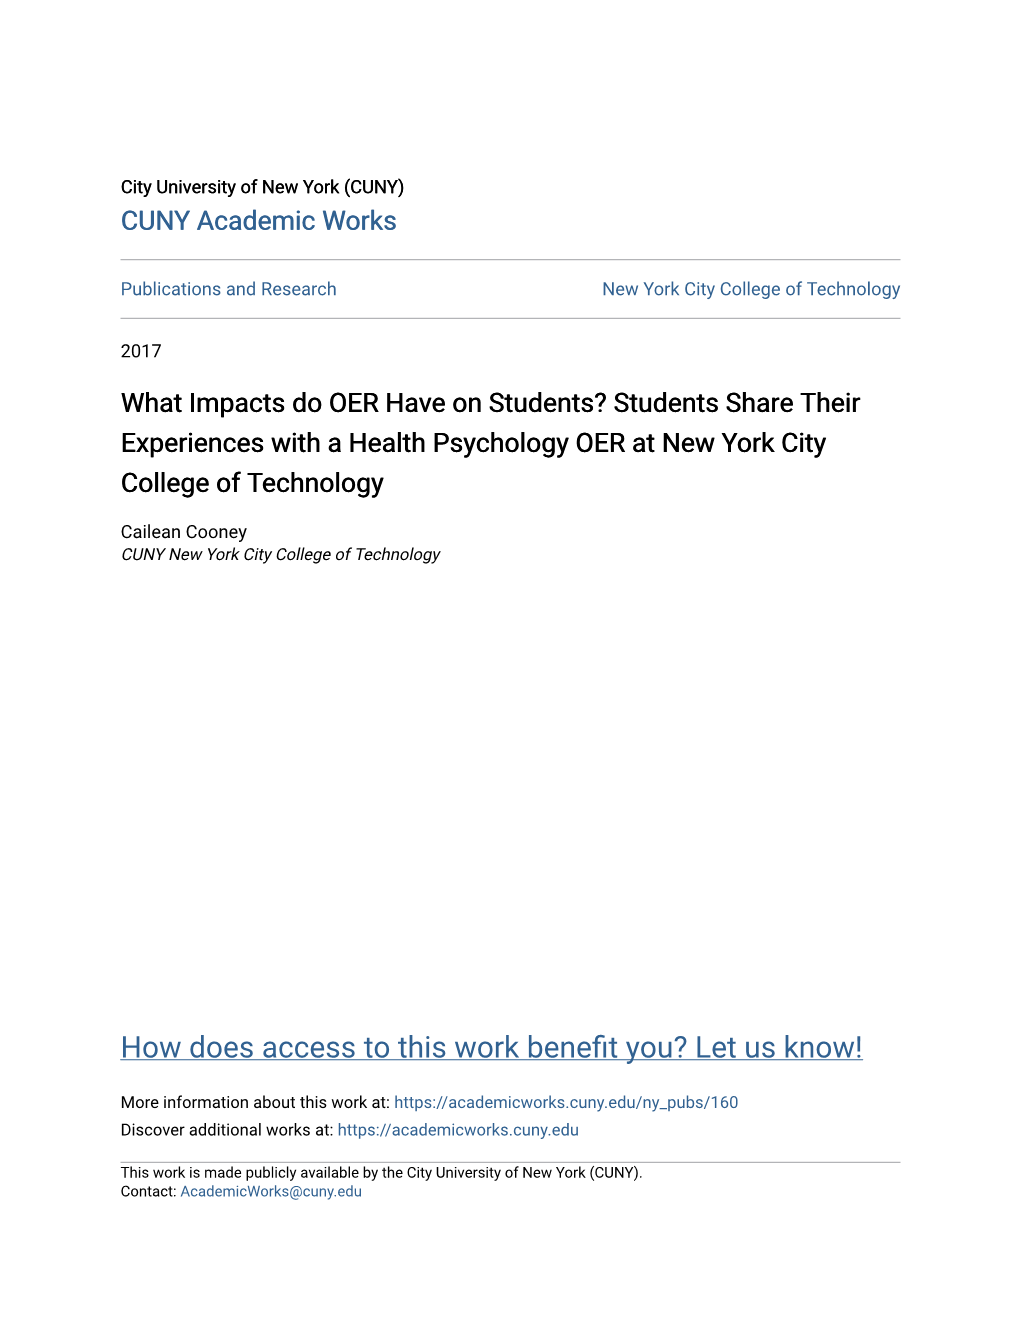 What Impacts Do OER Have on Students? Students Share Their Experiences with a Health Psychology OER at New York City College of Technology